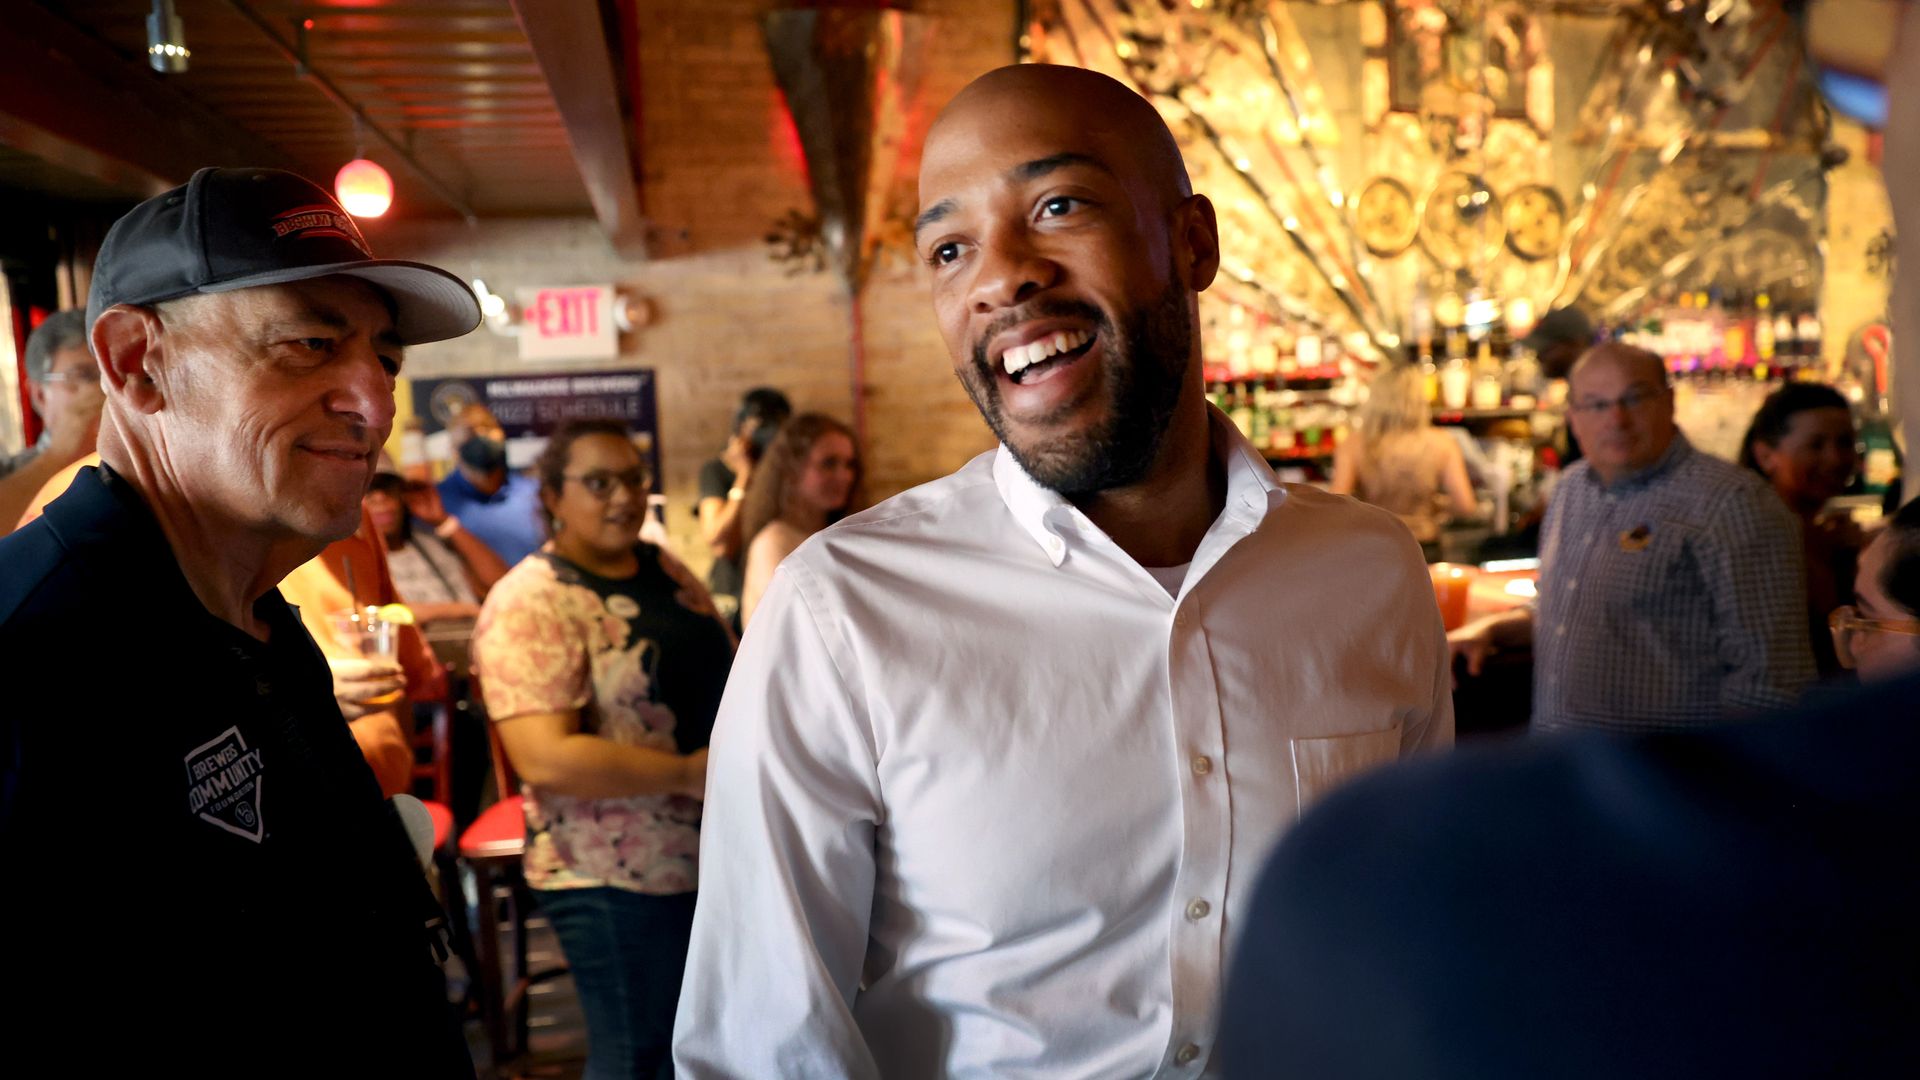 Wisconsin Lieutenant Governor Mandela Barnes who is running to become the Democratic nominee for the U.S. senate greets guests during a campaign event.